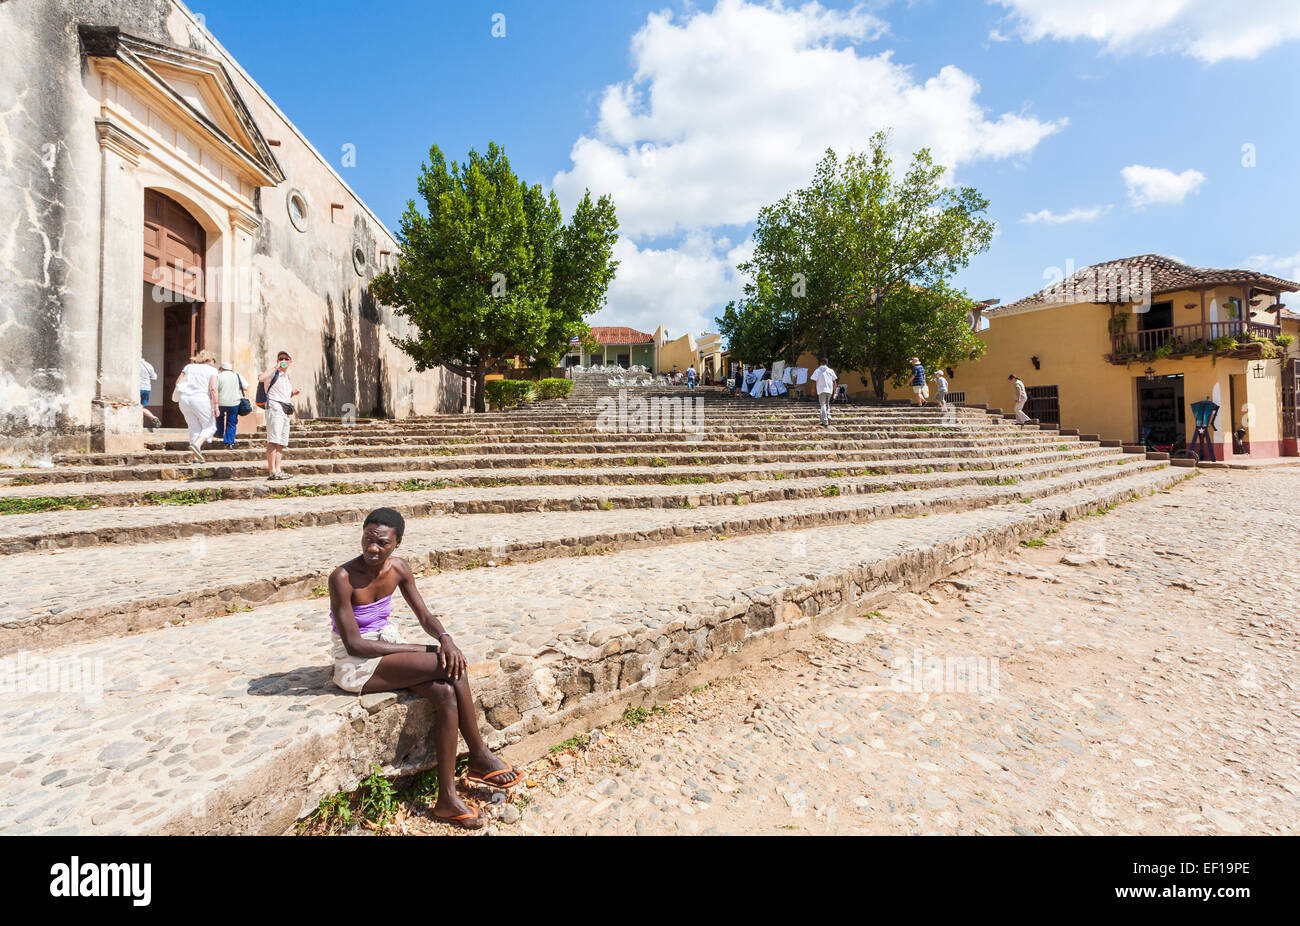 Cuban lifestyle: Very thin local Cuban young woman sitting on steps in downtown Trinidad, Cuba on a sunny day with a blue sky and white clouds Stock Photo